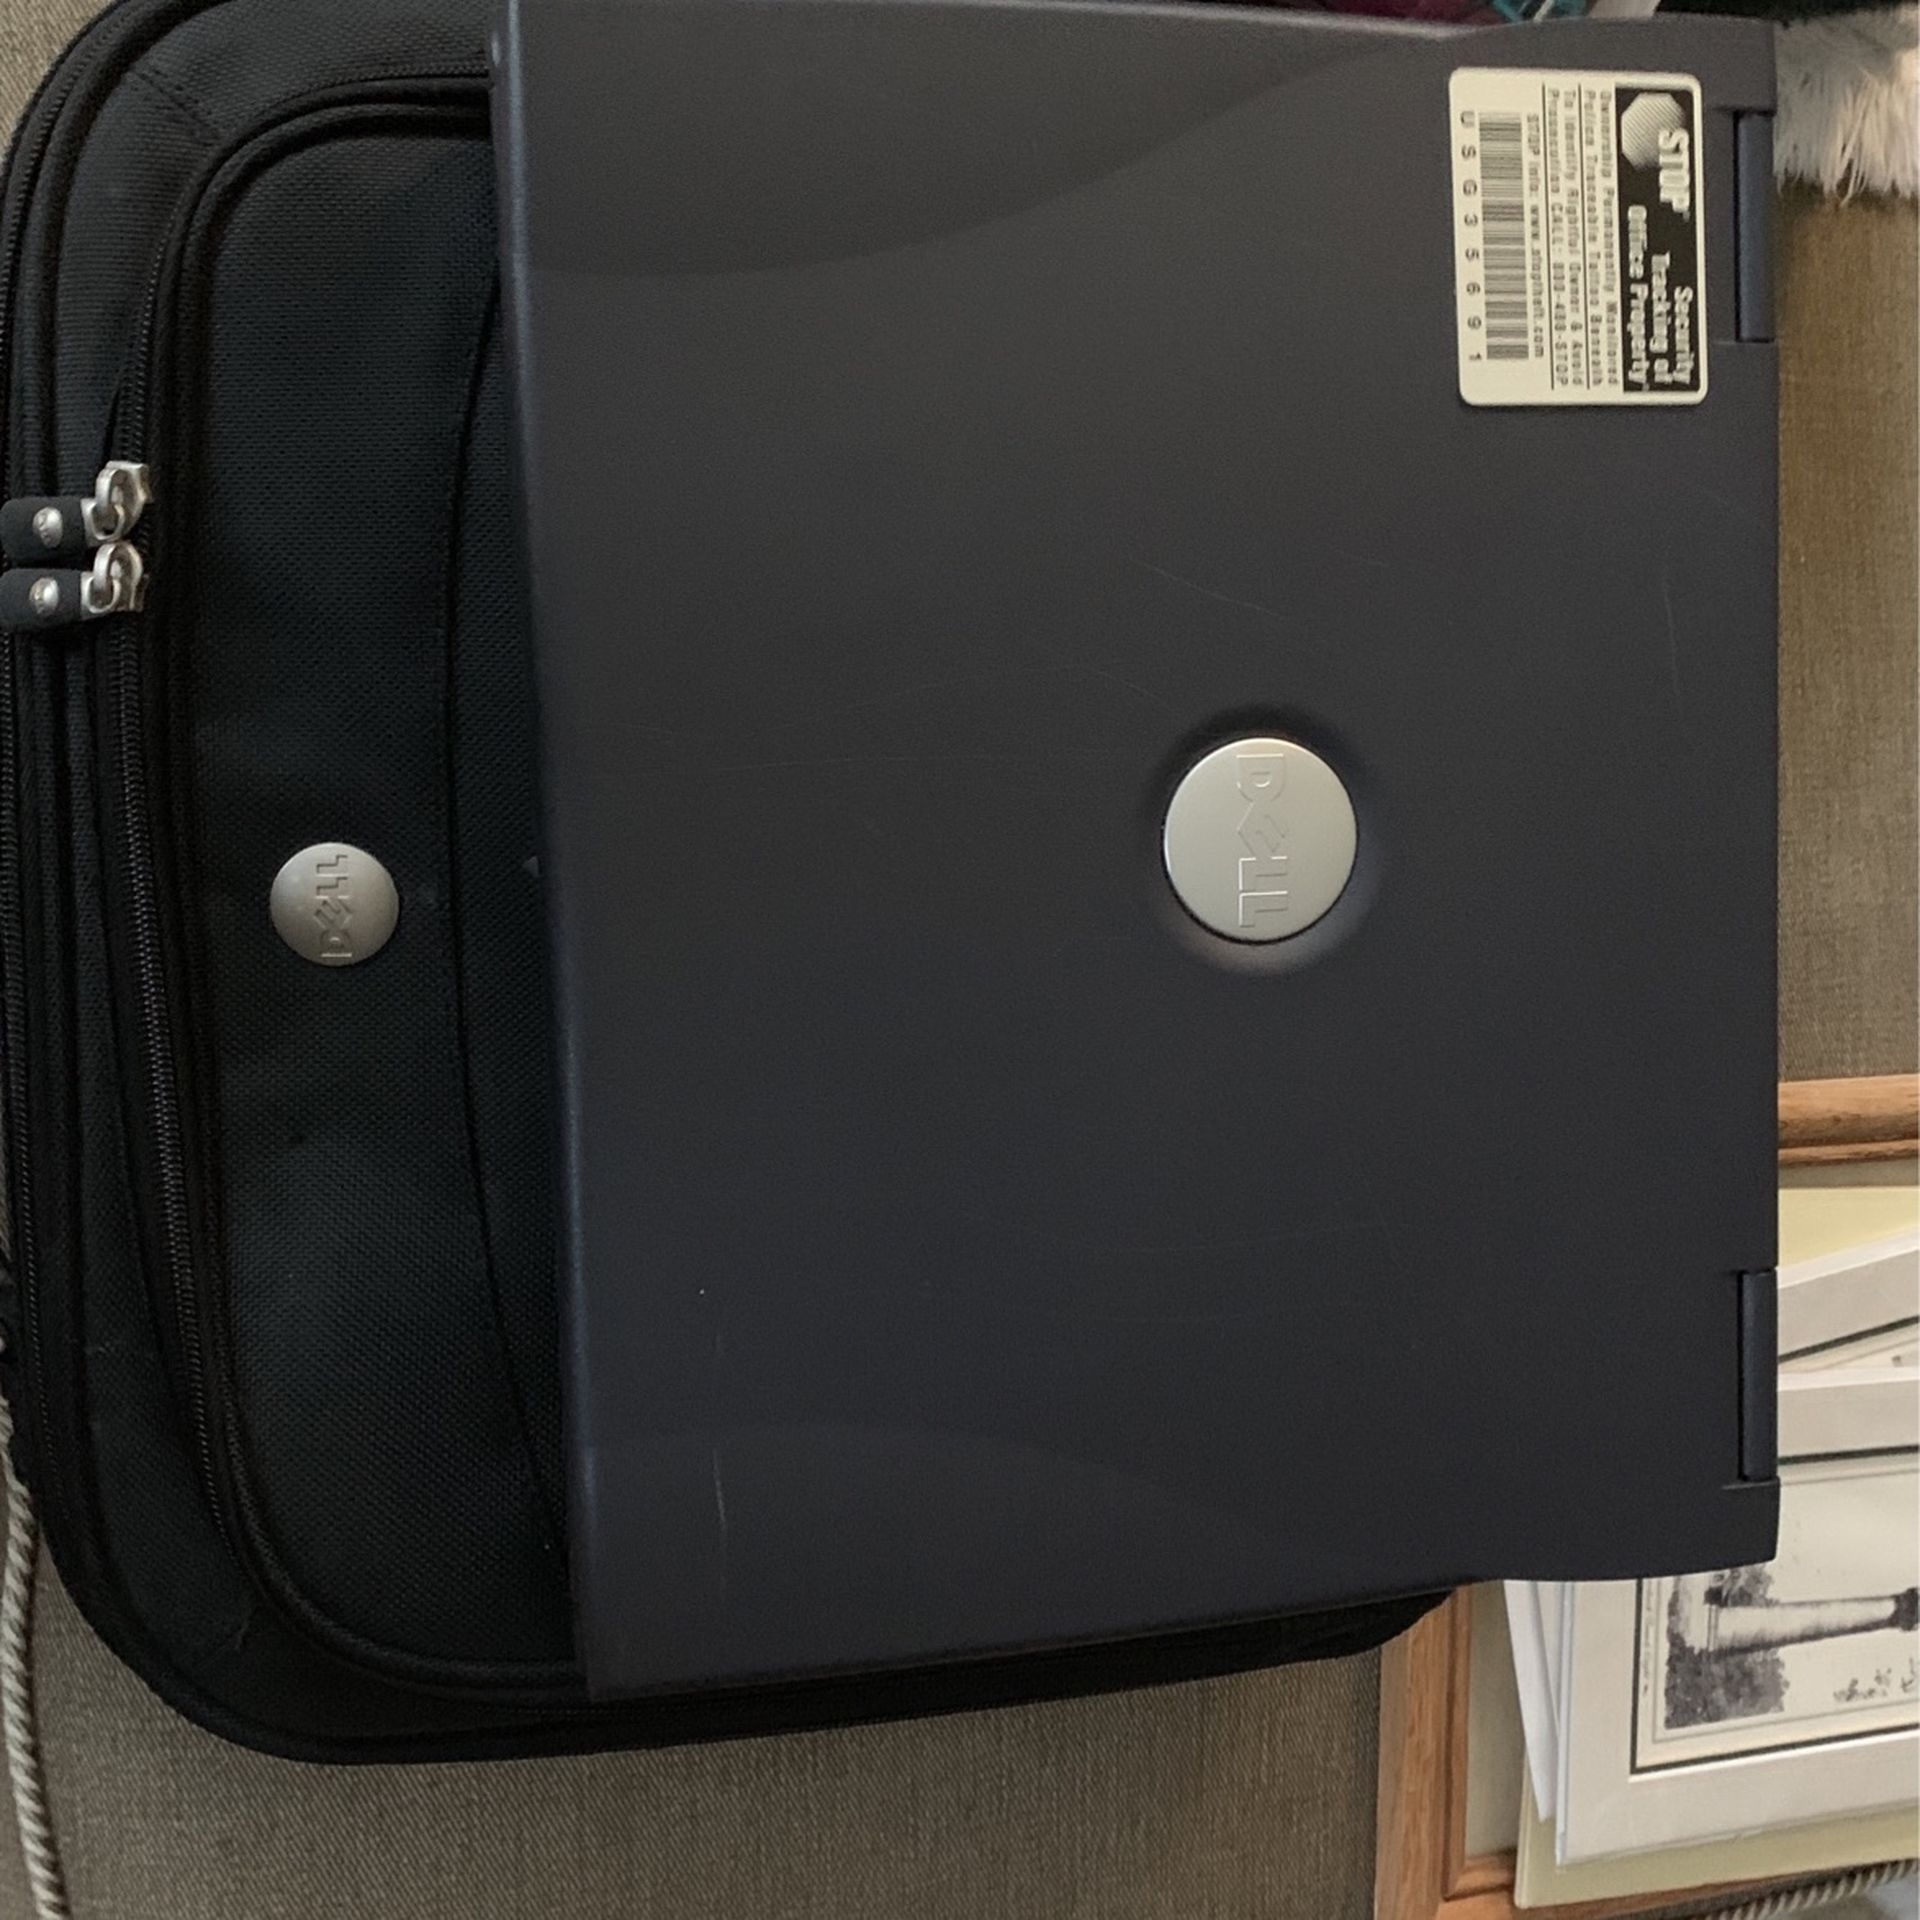 Dell Laptop With Case